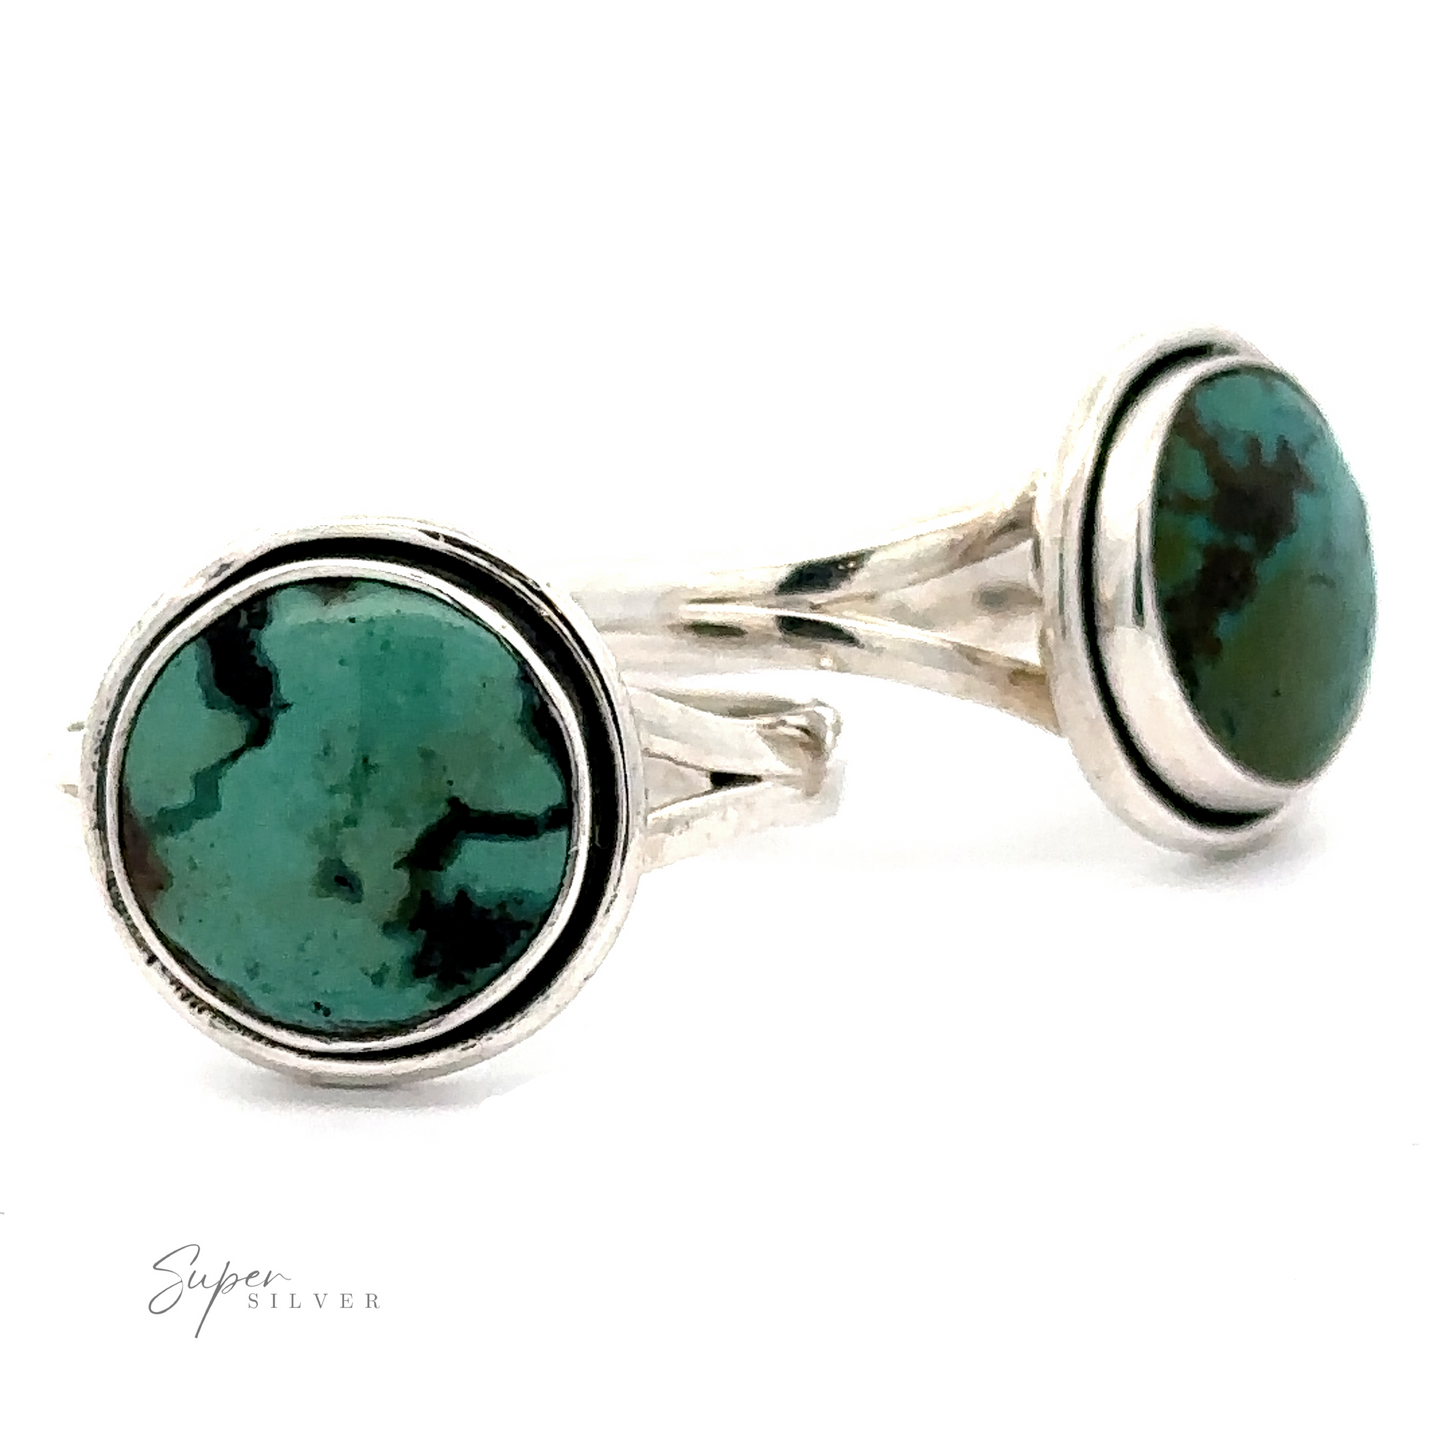 A pair of Round Natural Turquoise Rings With Plain Border showcasing unique black veins, placed against a white background. Text "Super Silver" is visible in the corner.